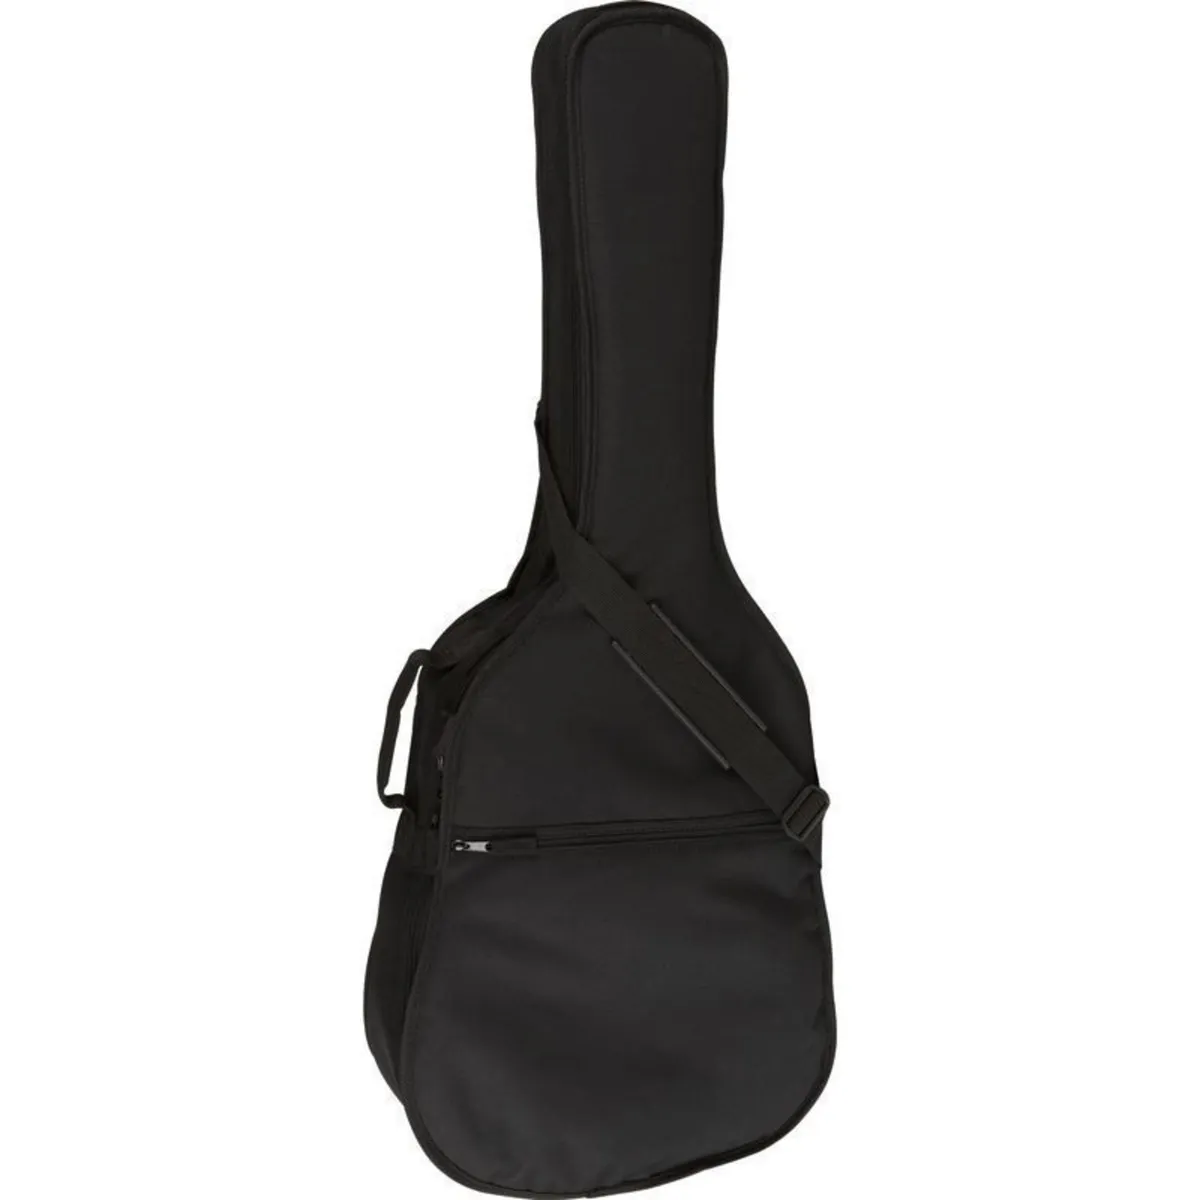 Guitar gigbags & cases electric or acoustic guitar - Image 1